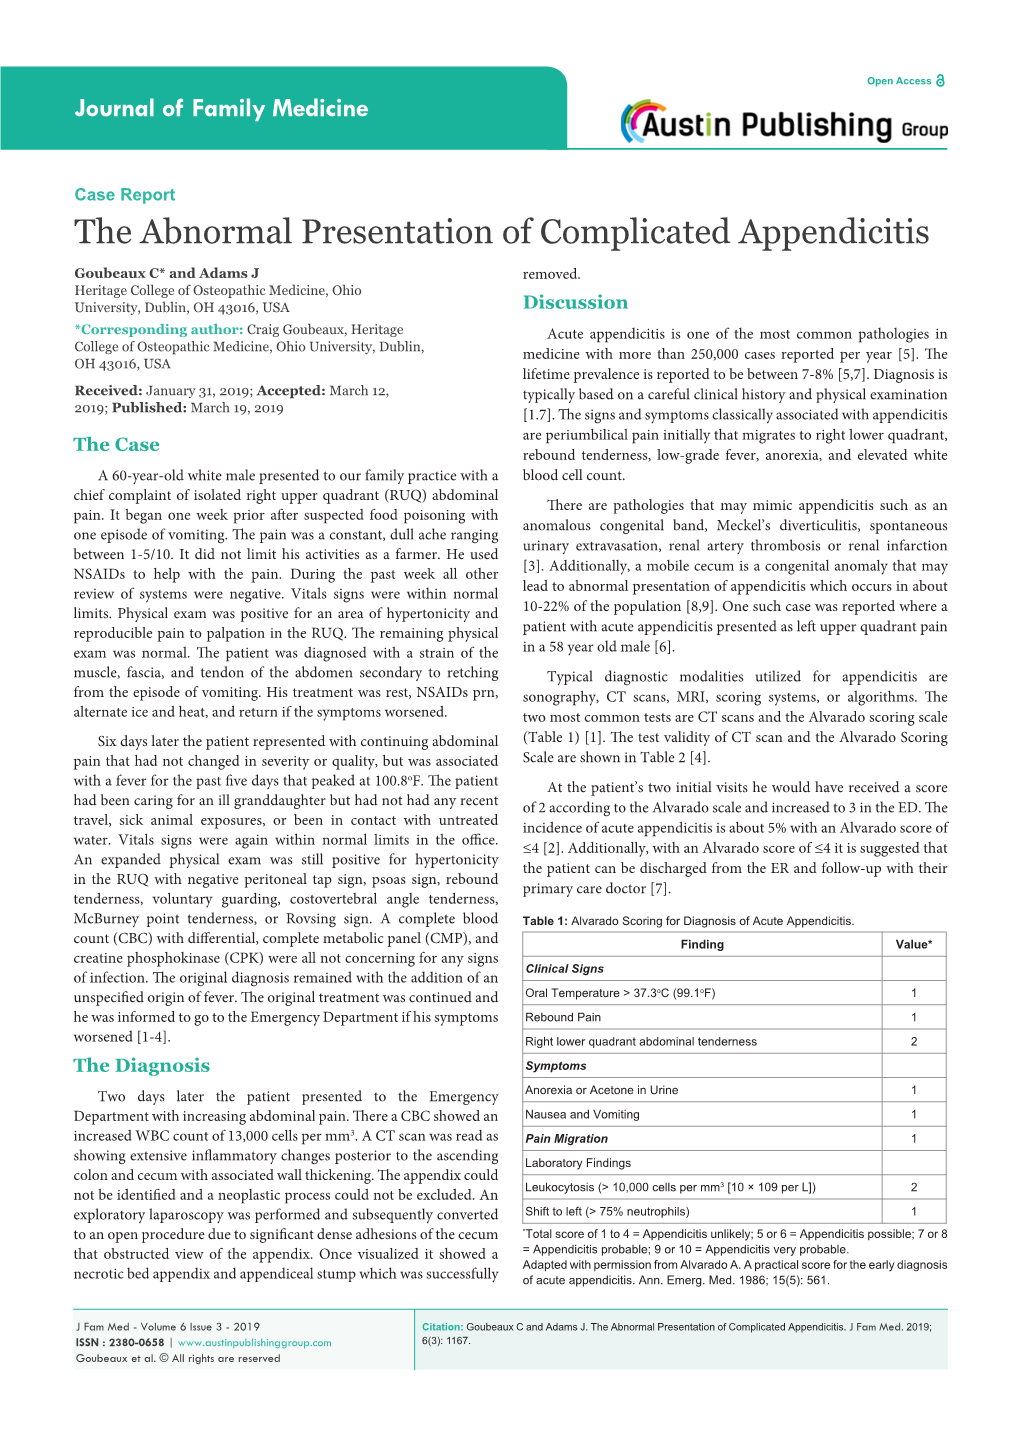 The Abnormal Presentation of Complicated Appendicitis Goubeaux C* and Adams J Removed